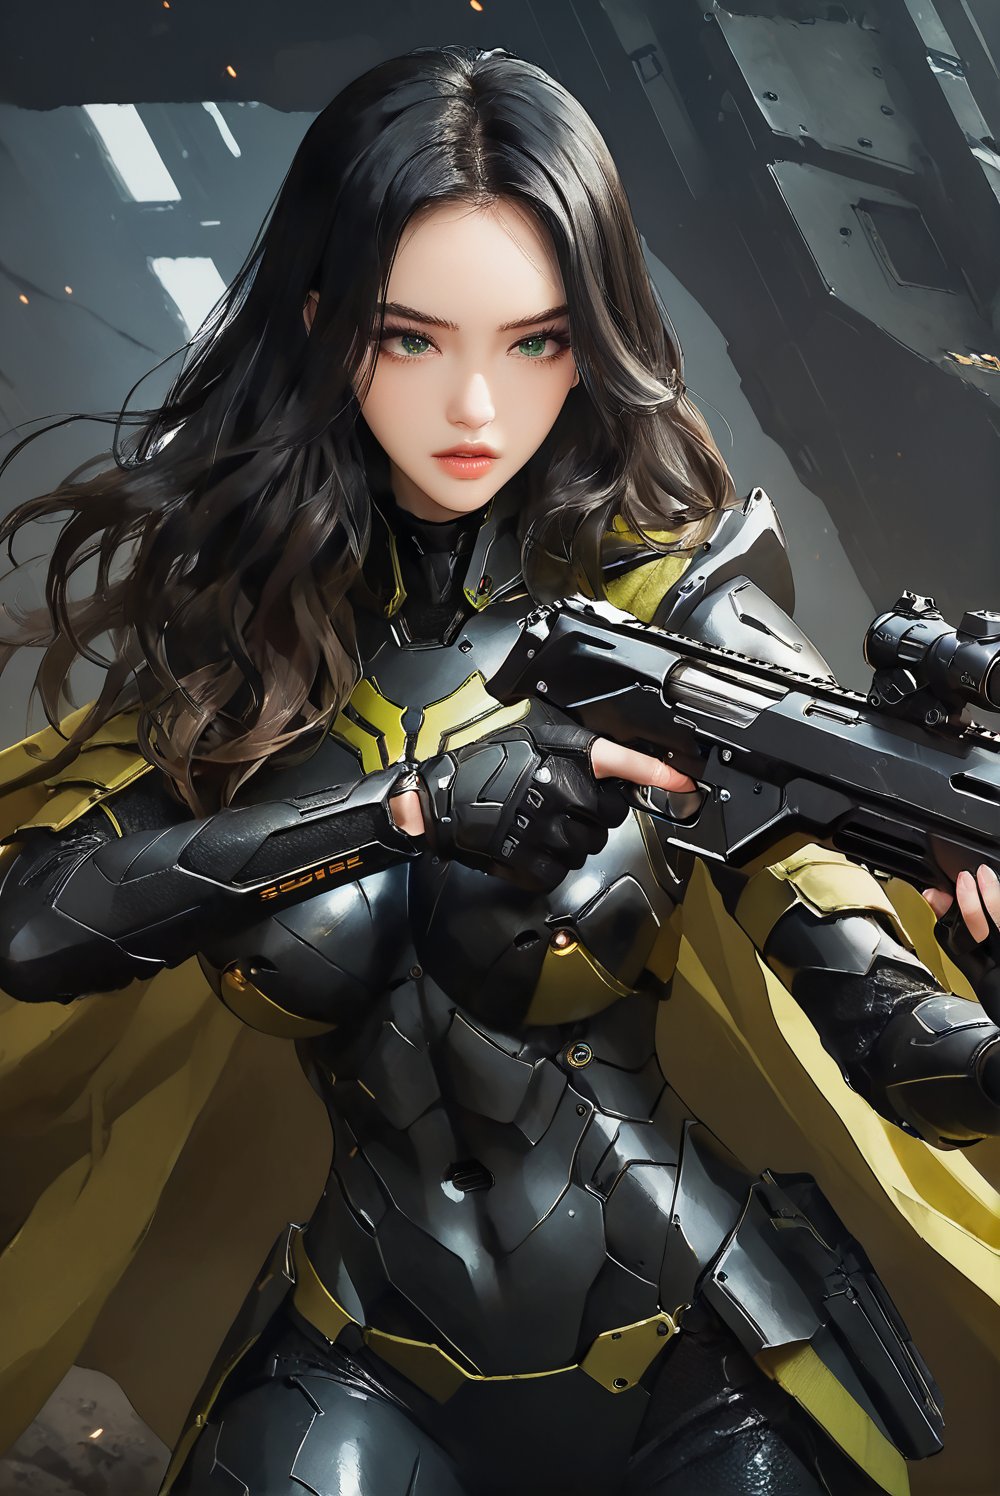 score_9, score_8_up, score_7_up, stellar_blade_tachy, a stunningly glamorous 17 year old girl, in a war zone, trench, close up, perfect busty model body, green eyes, long black hair, balayage hair, gloves, two-tone green and black armor, combat suit with external skeleton design, pencil drawing, masterpiece, best quality, official art, beauty & aesthetics, IncrsNikkeProfile, zoom cape, holding a gun, holding a gun, one knee,Expressiveh